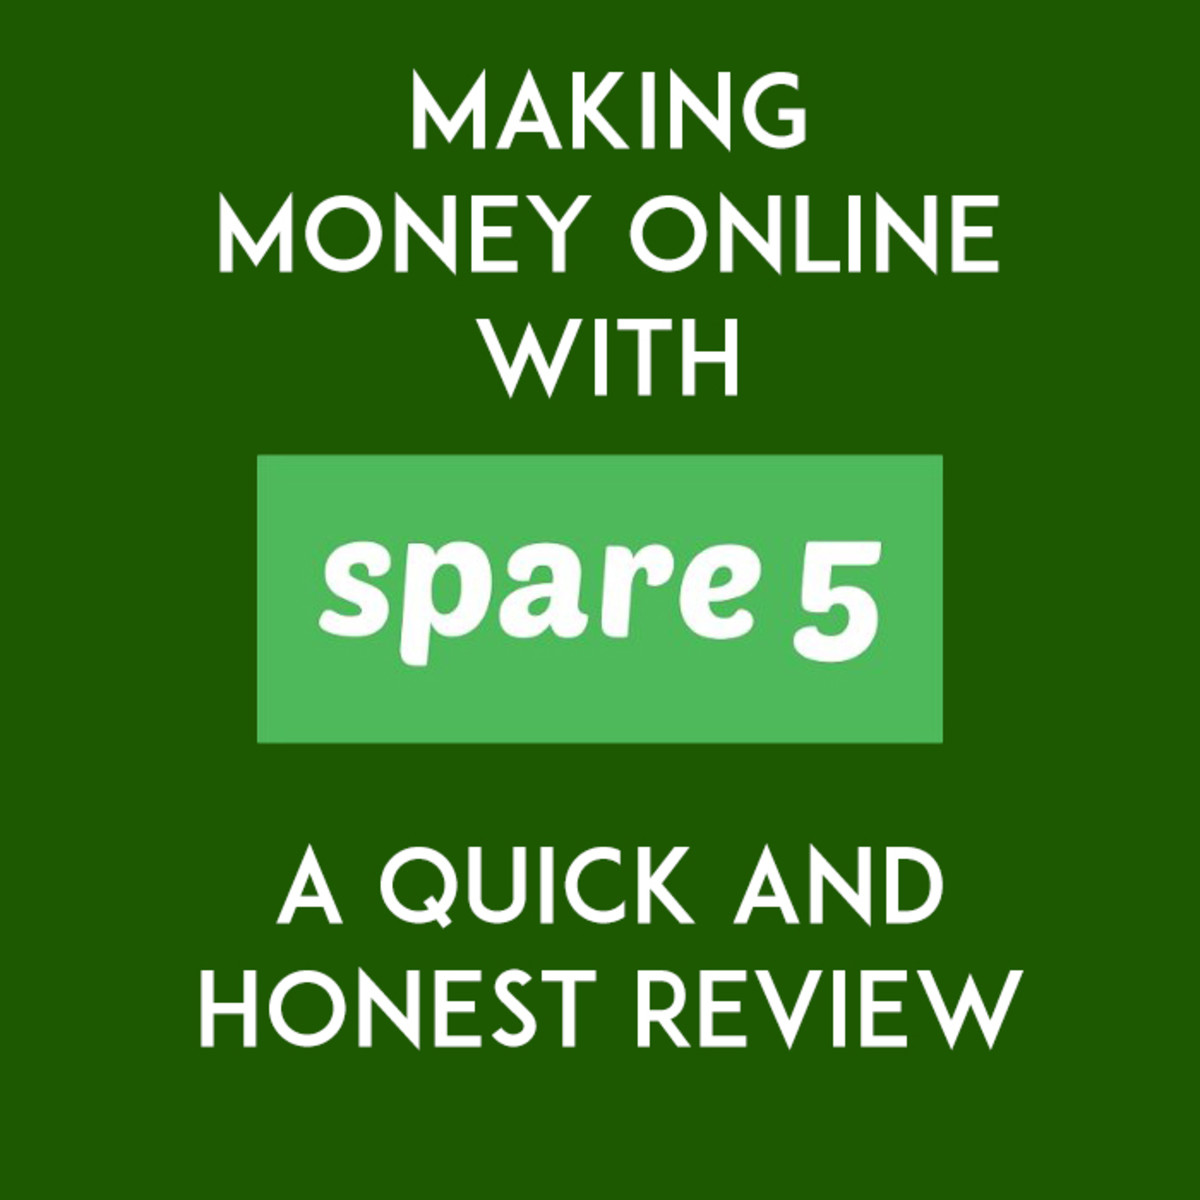 Making Money Online With Spare 5: A Review